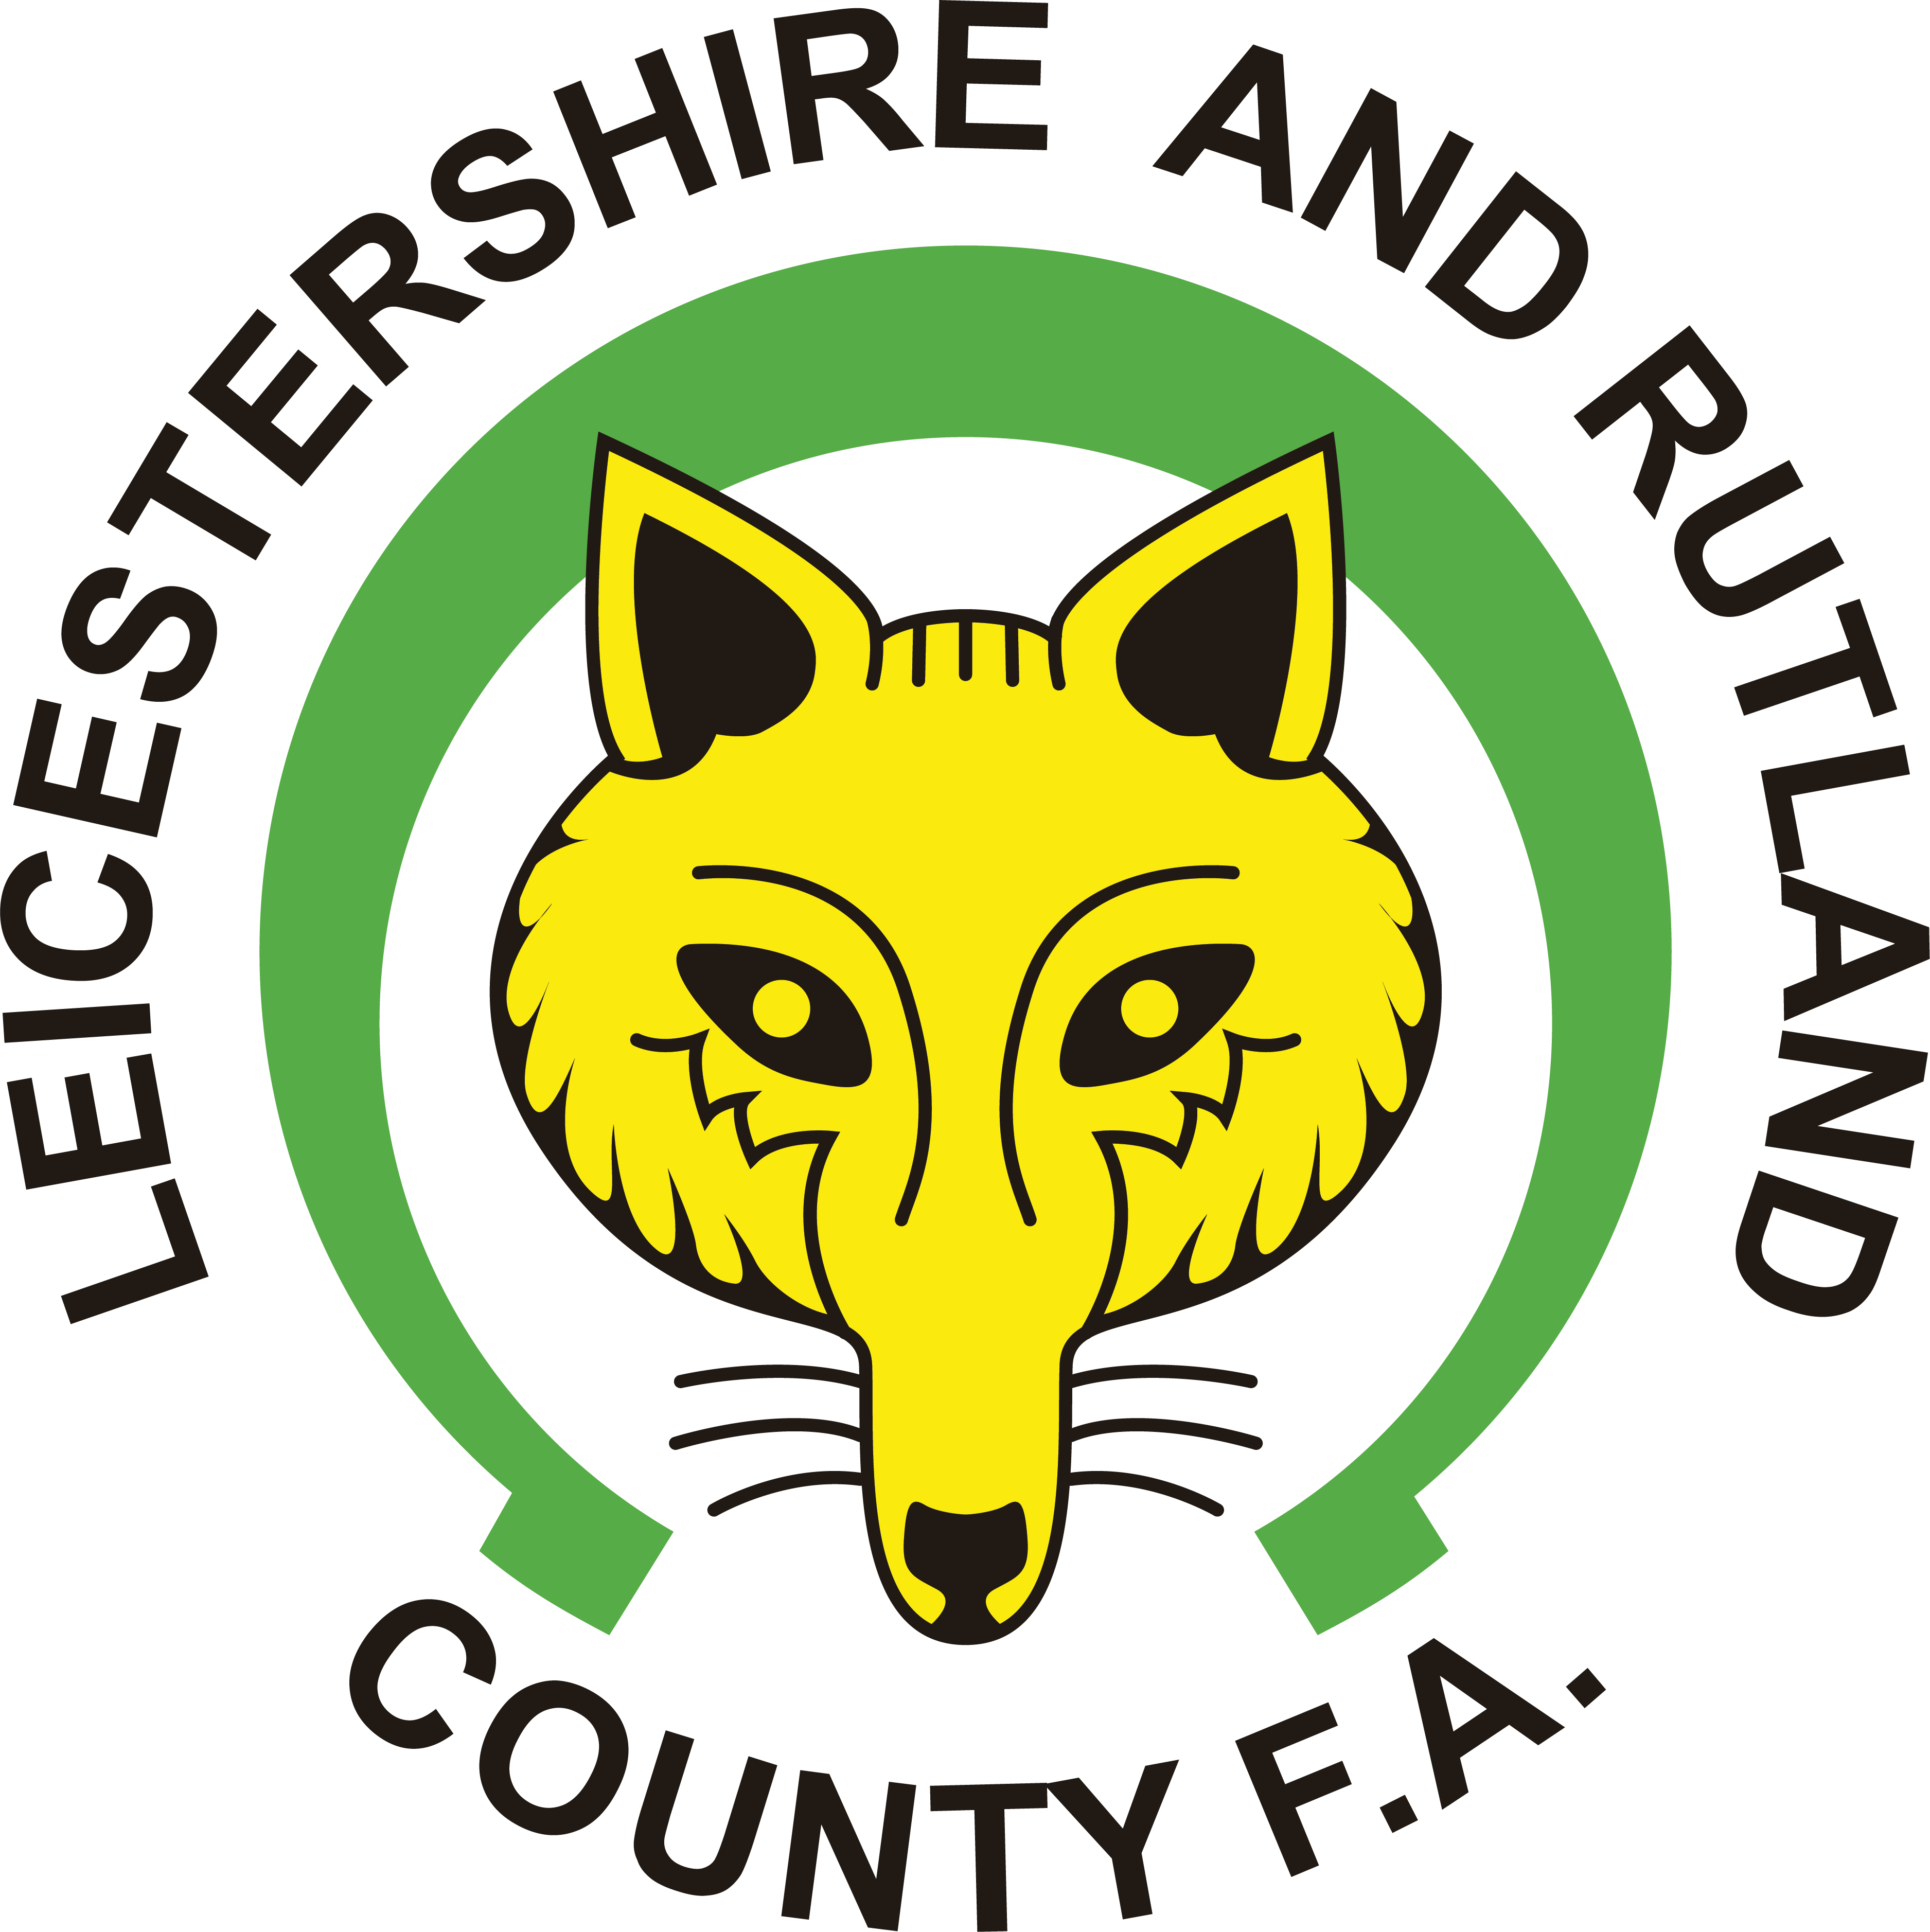 Leicestershire Badge